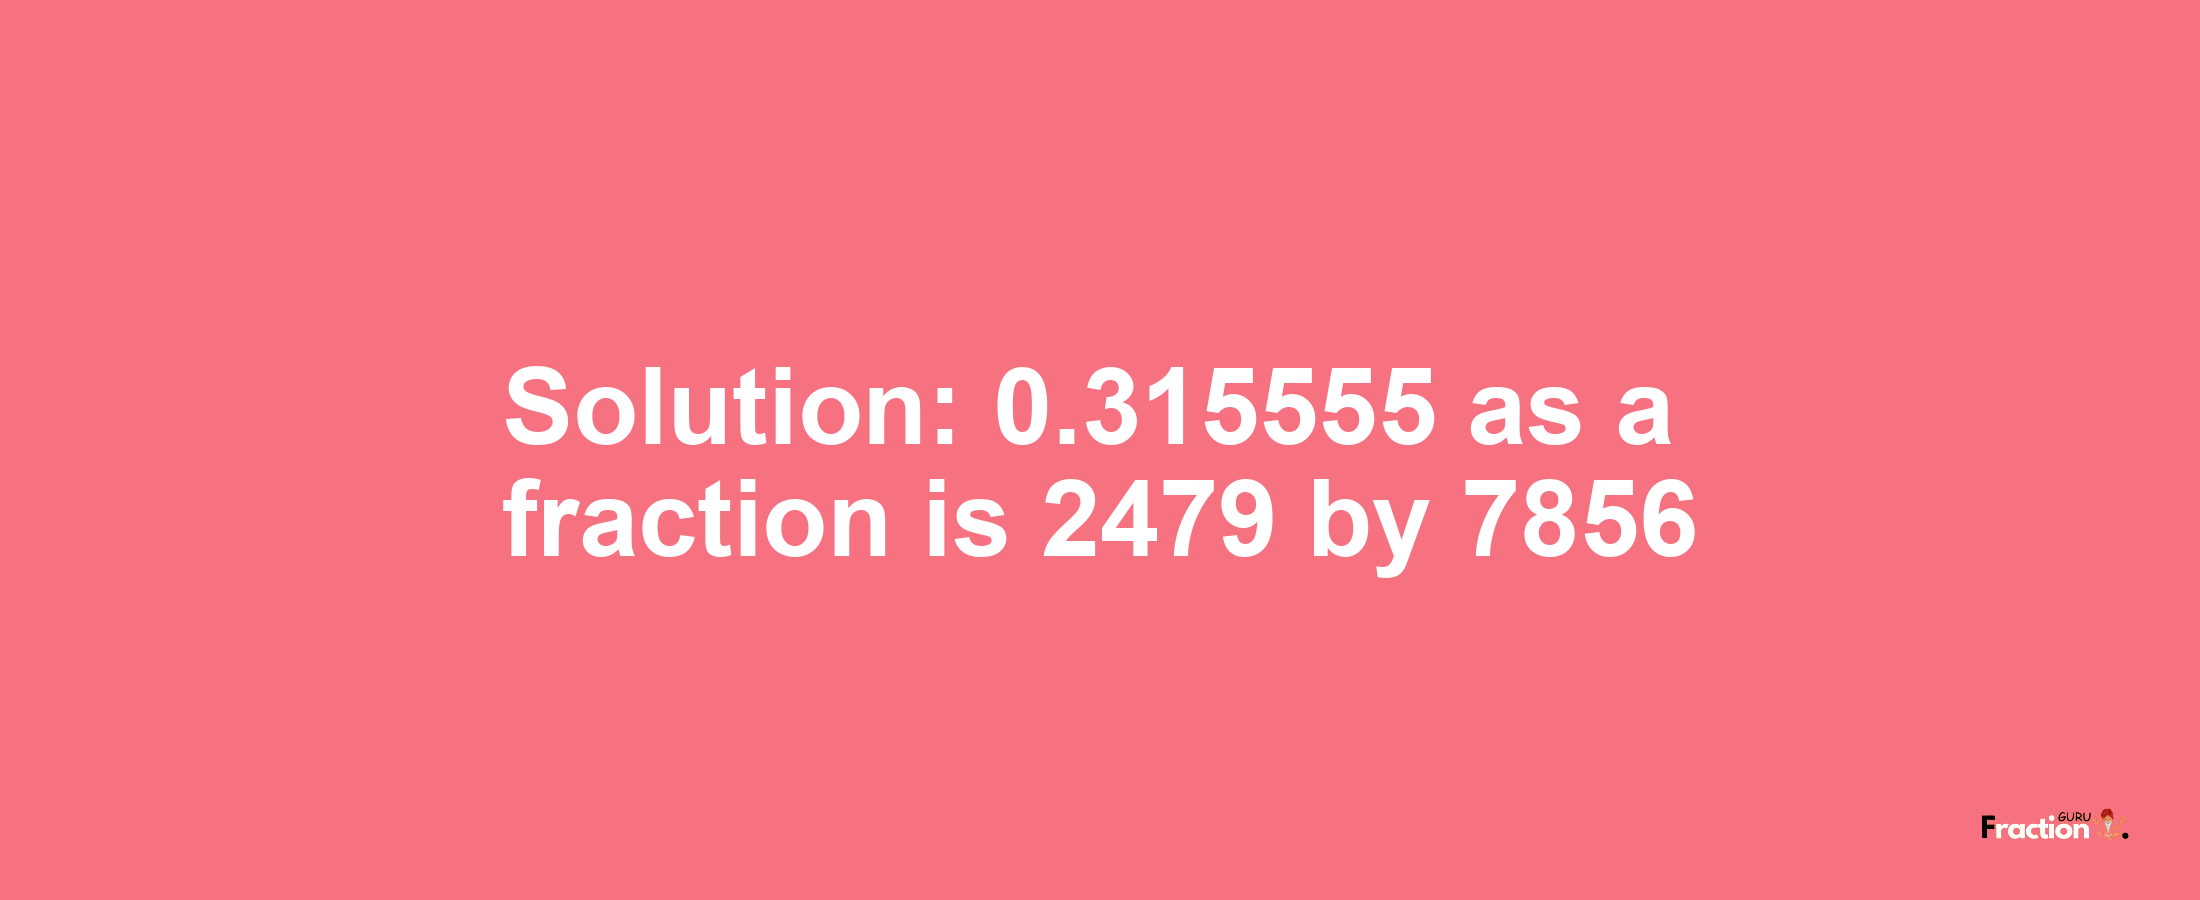 Solution:0.315555 as a fraction is 2479/7856